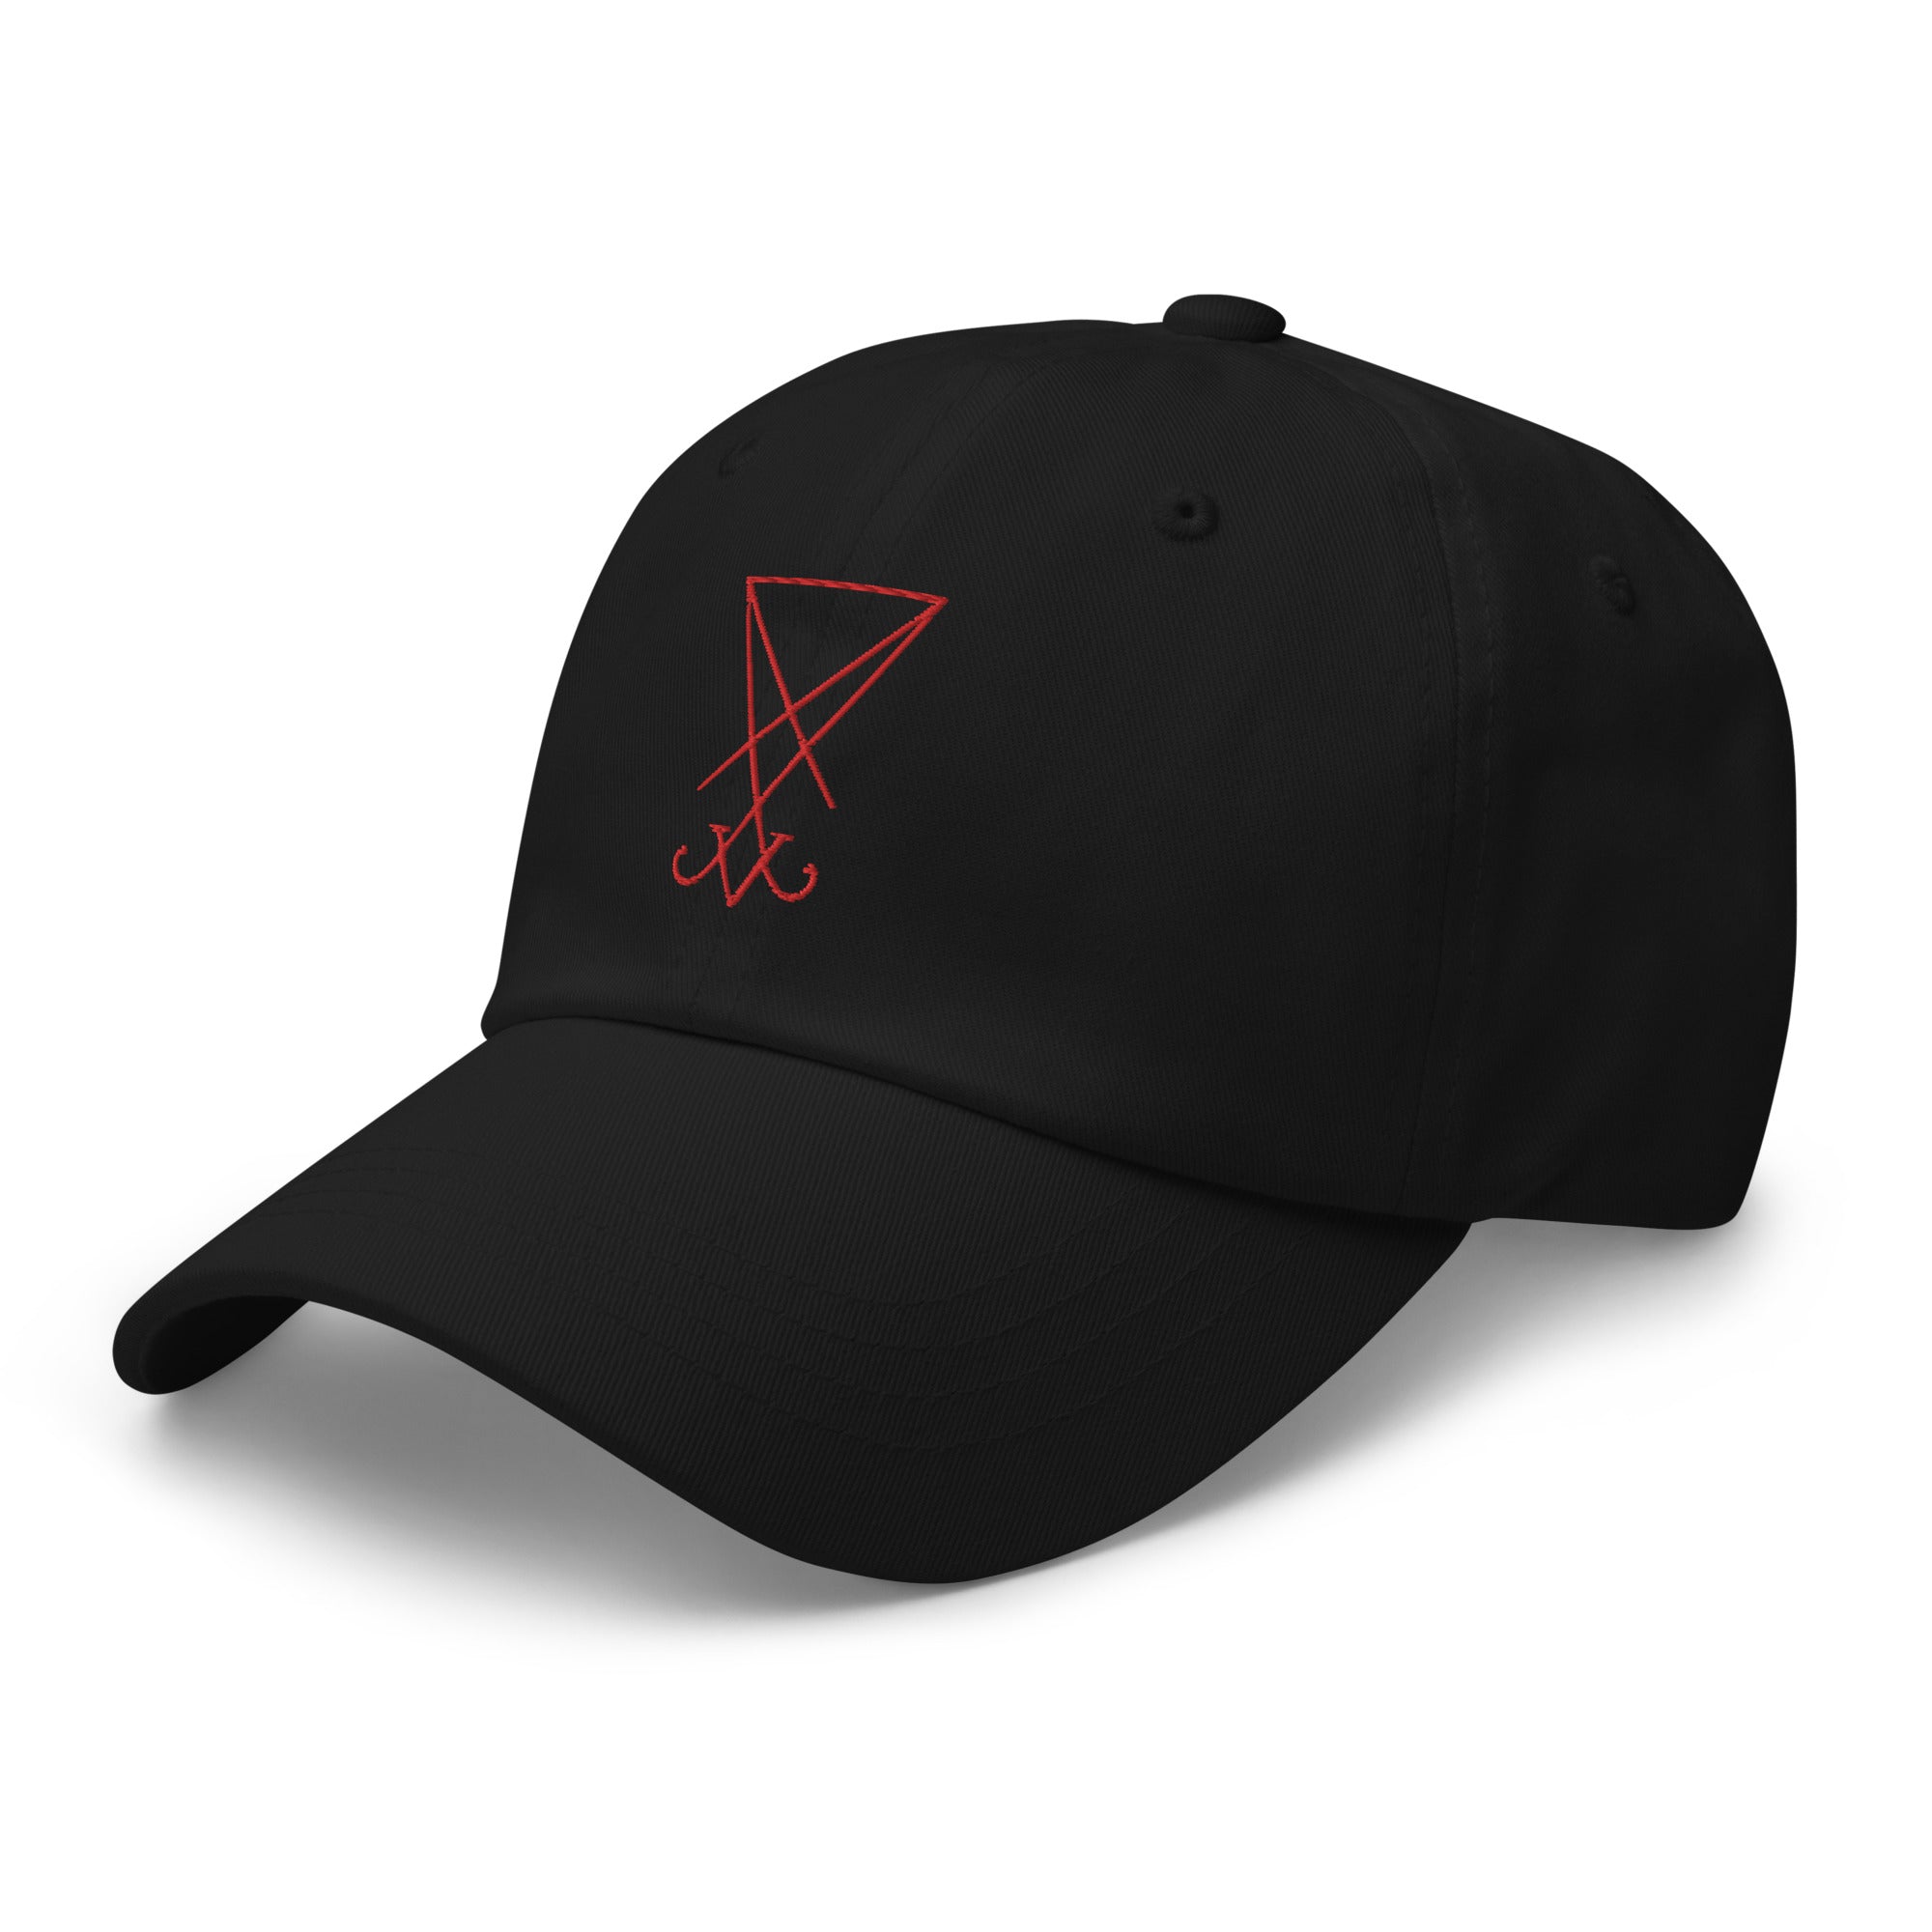 Red Thread Sigil of Lucifer Symbol The Seal of Satan Embroidered Baseball Cap Dad hat - Edge of Life Designs